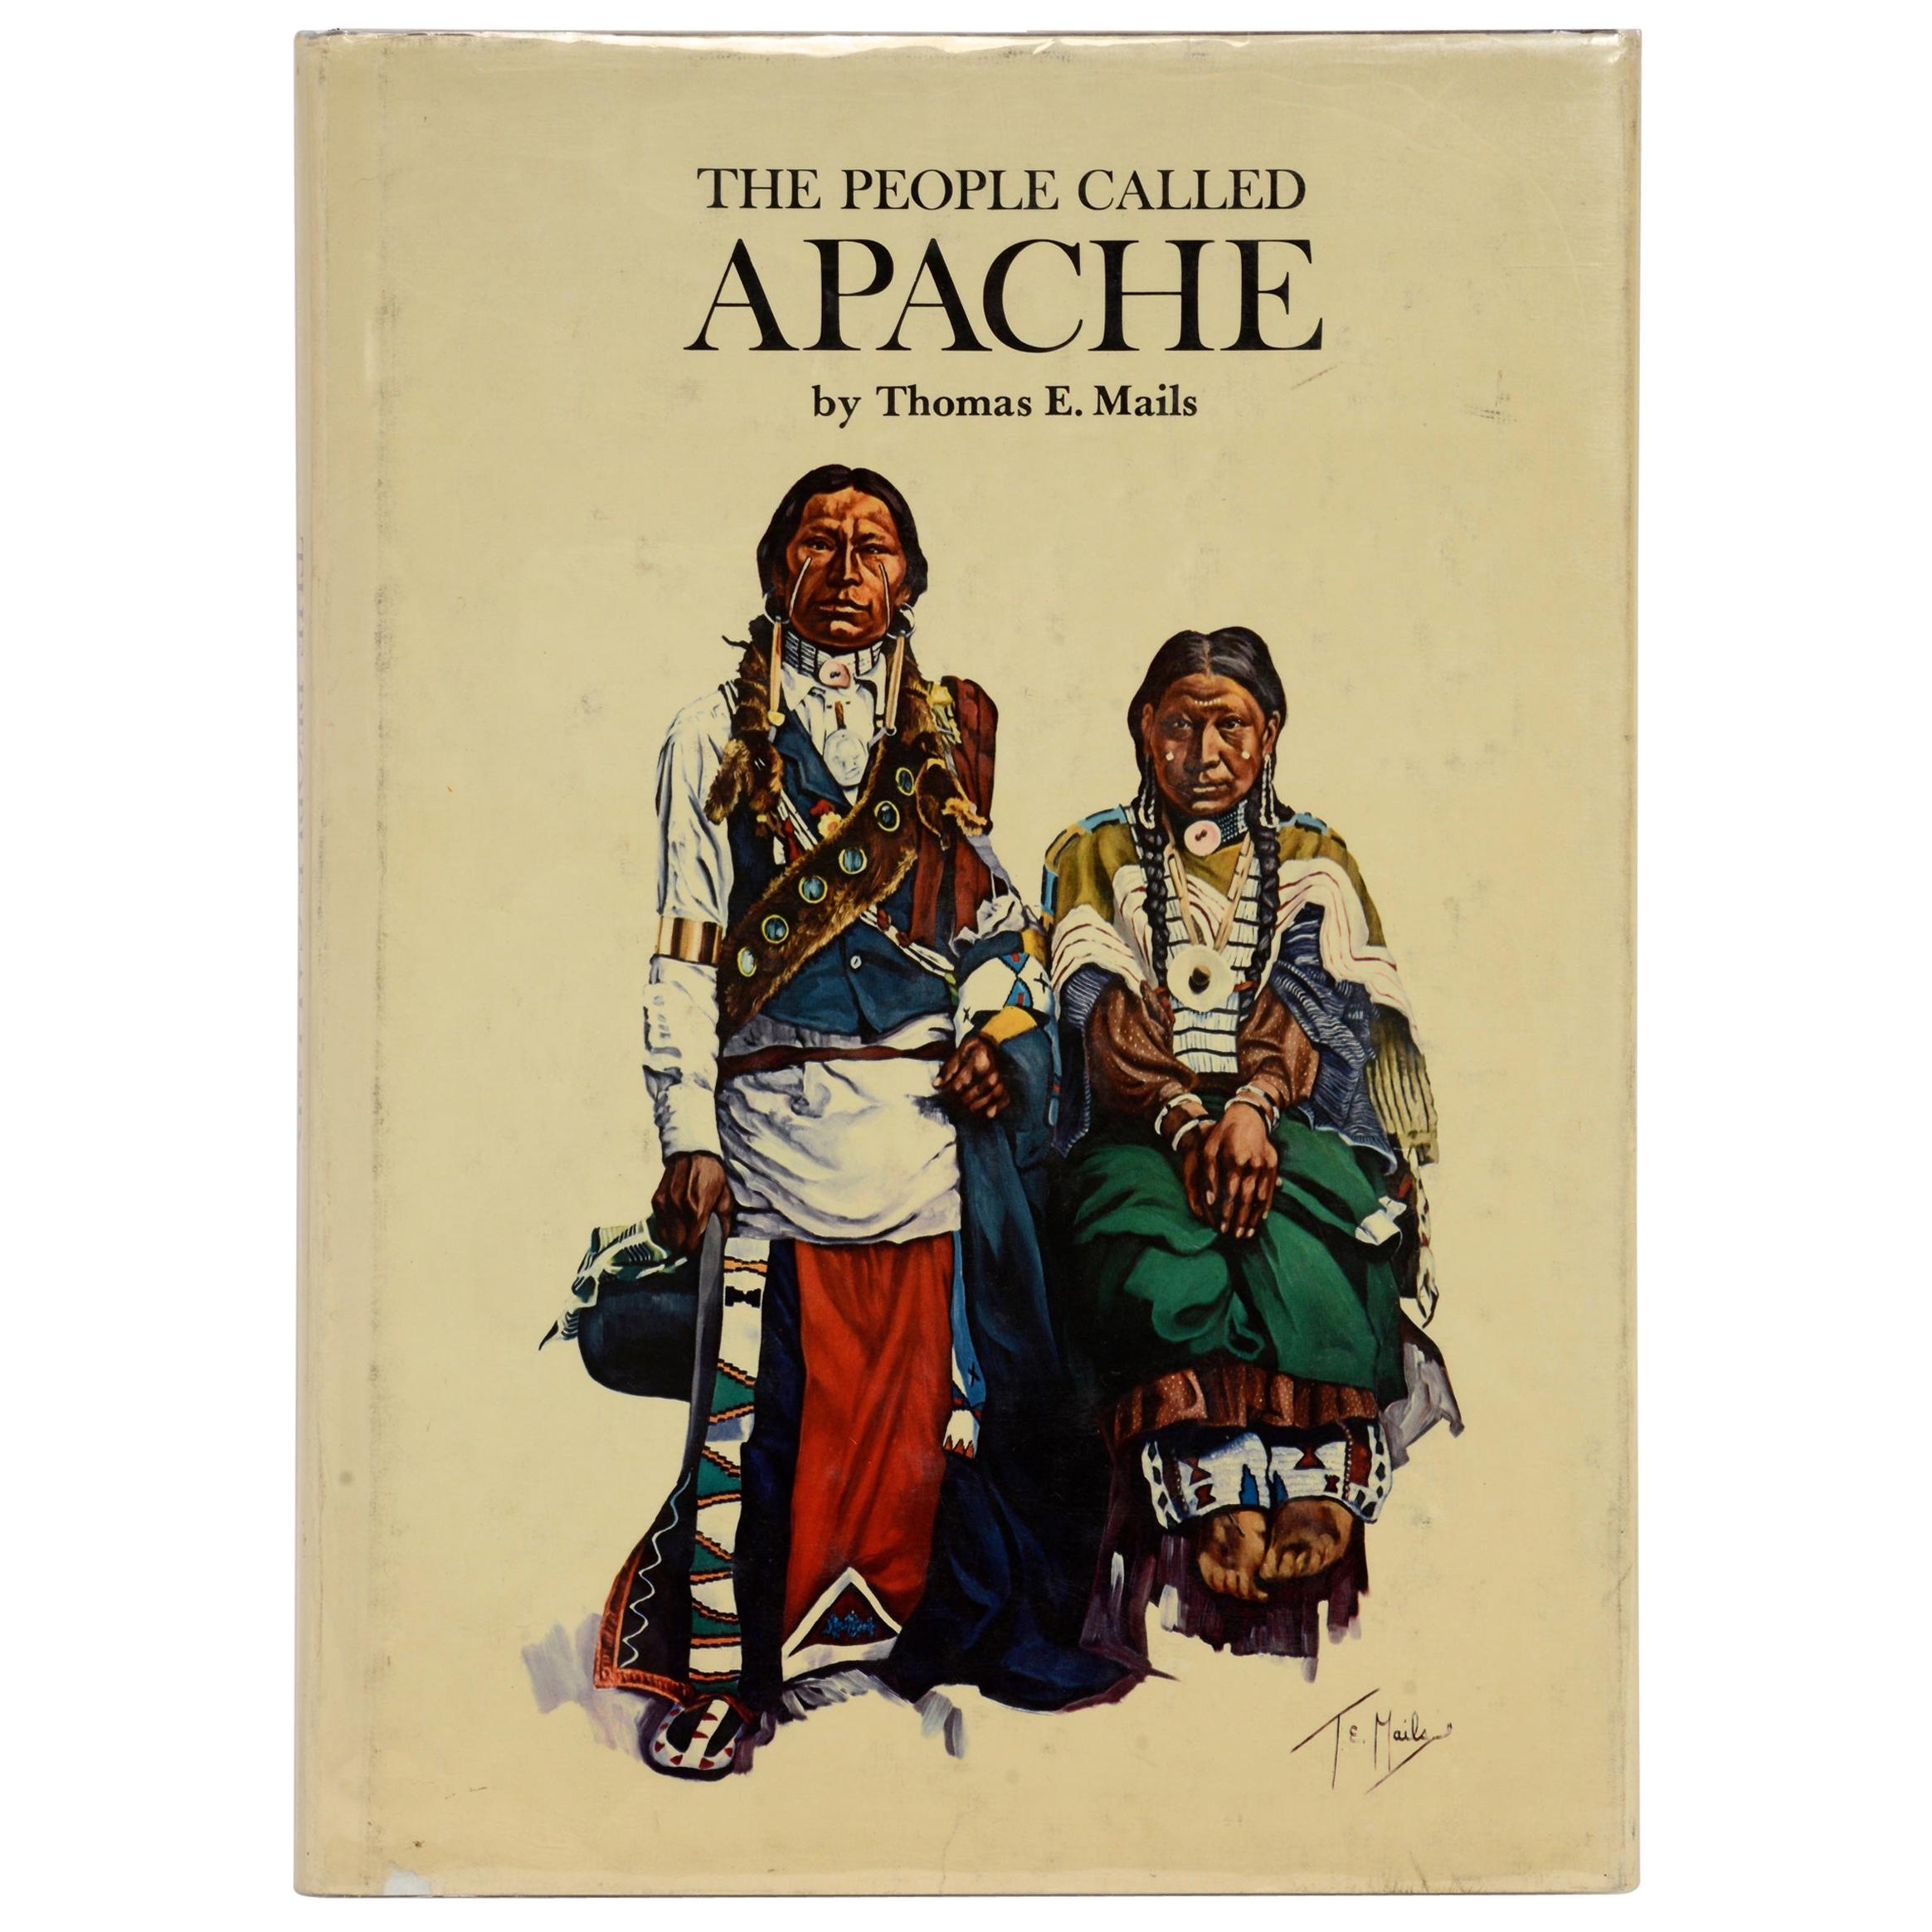 The People Called Apache by Thomas E. Mails